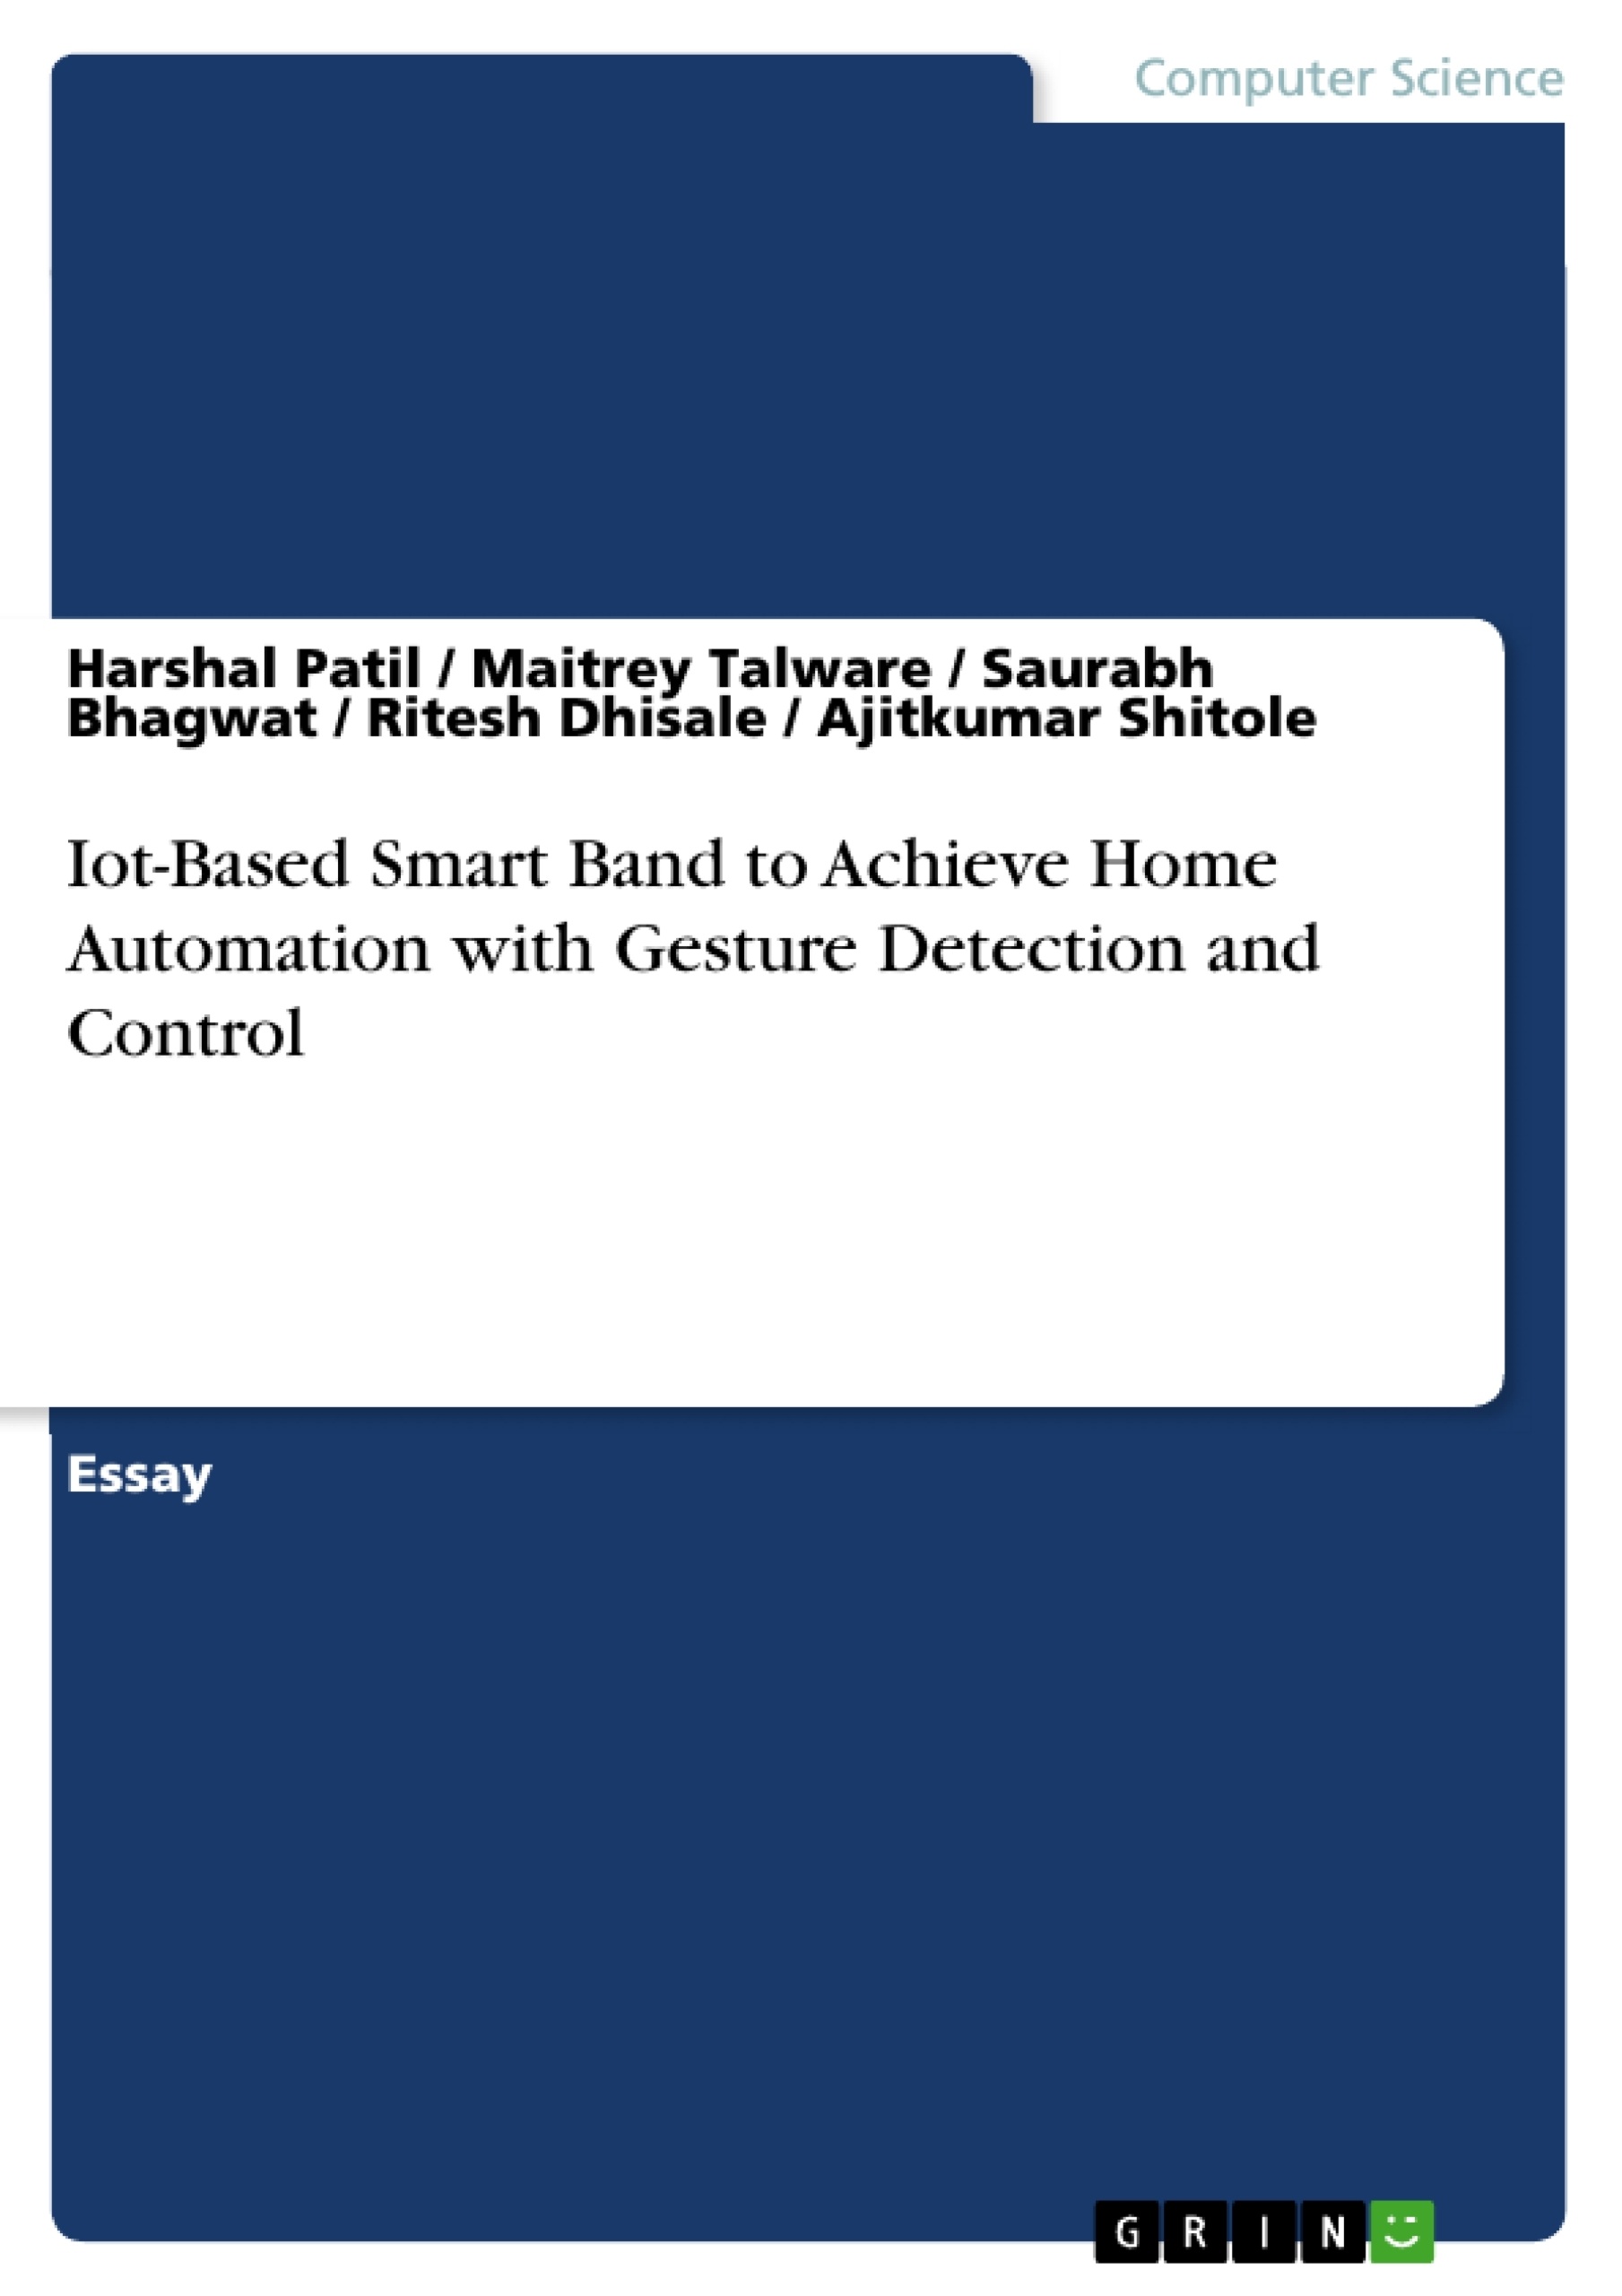 Title: Iot-Based Smart Band to Achieve Home Automation with Gesture Detection and Control